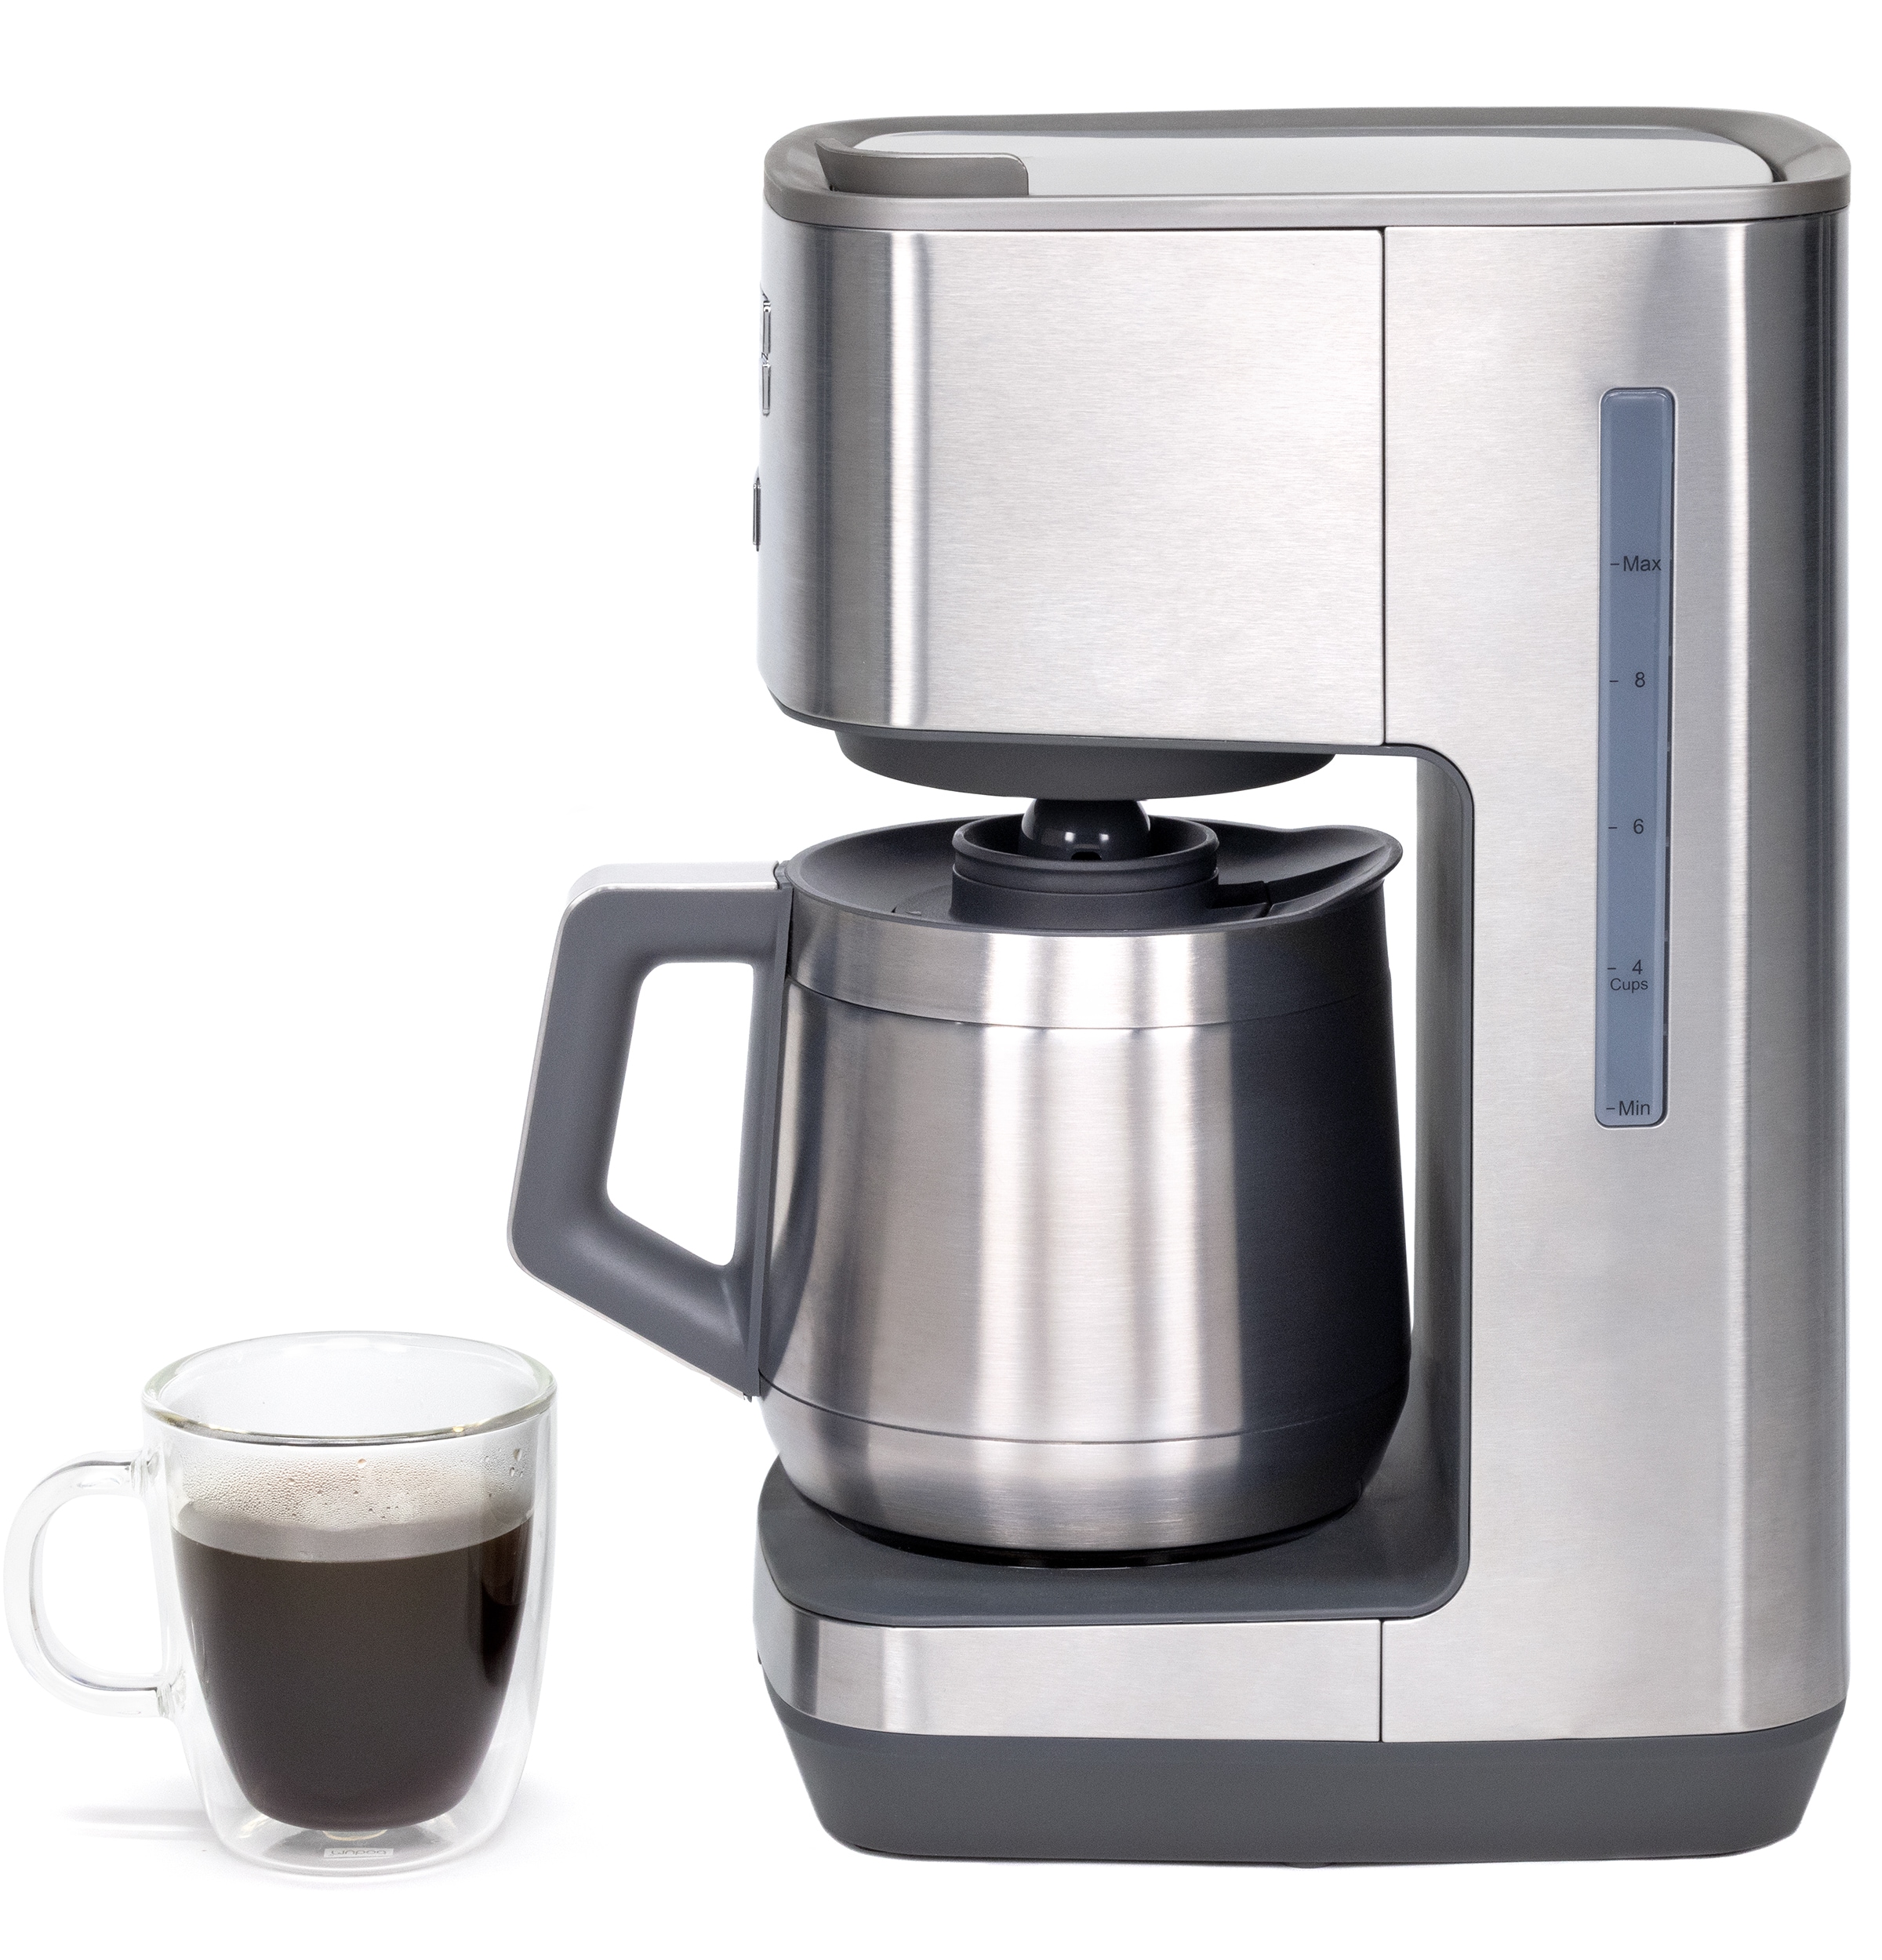 Café Specialty Drip Coffee Maker with Glass Carafe, 10 Cups, Stainless Steel